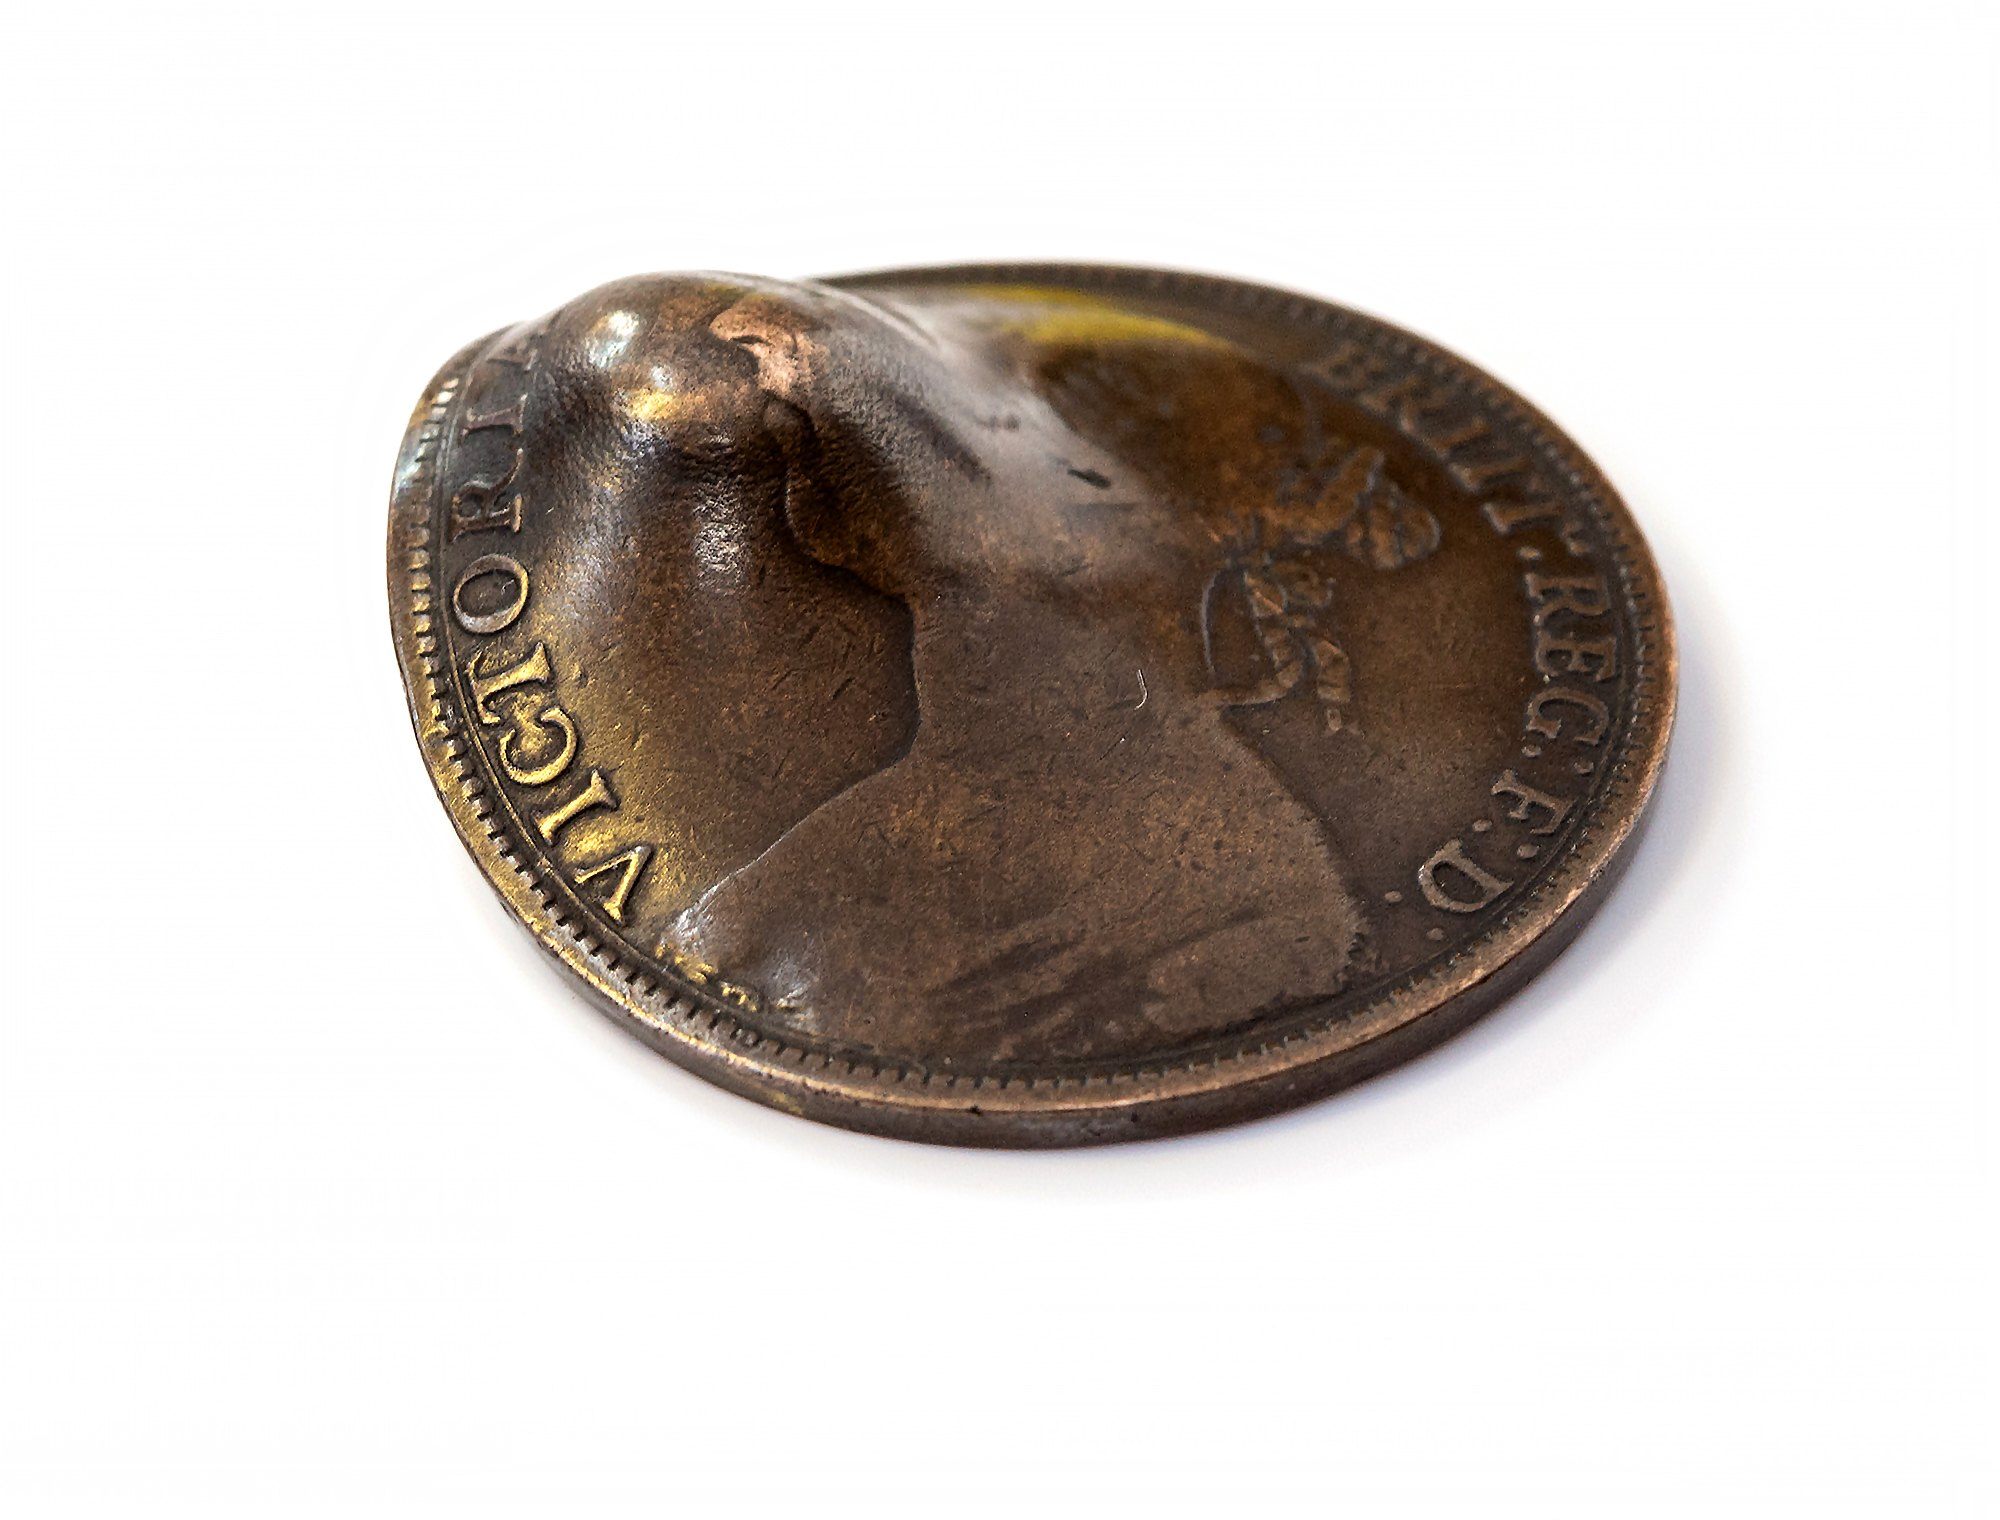 Sale: Penny That Stopped a Saved a Life - Atlas Obscura